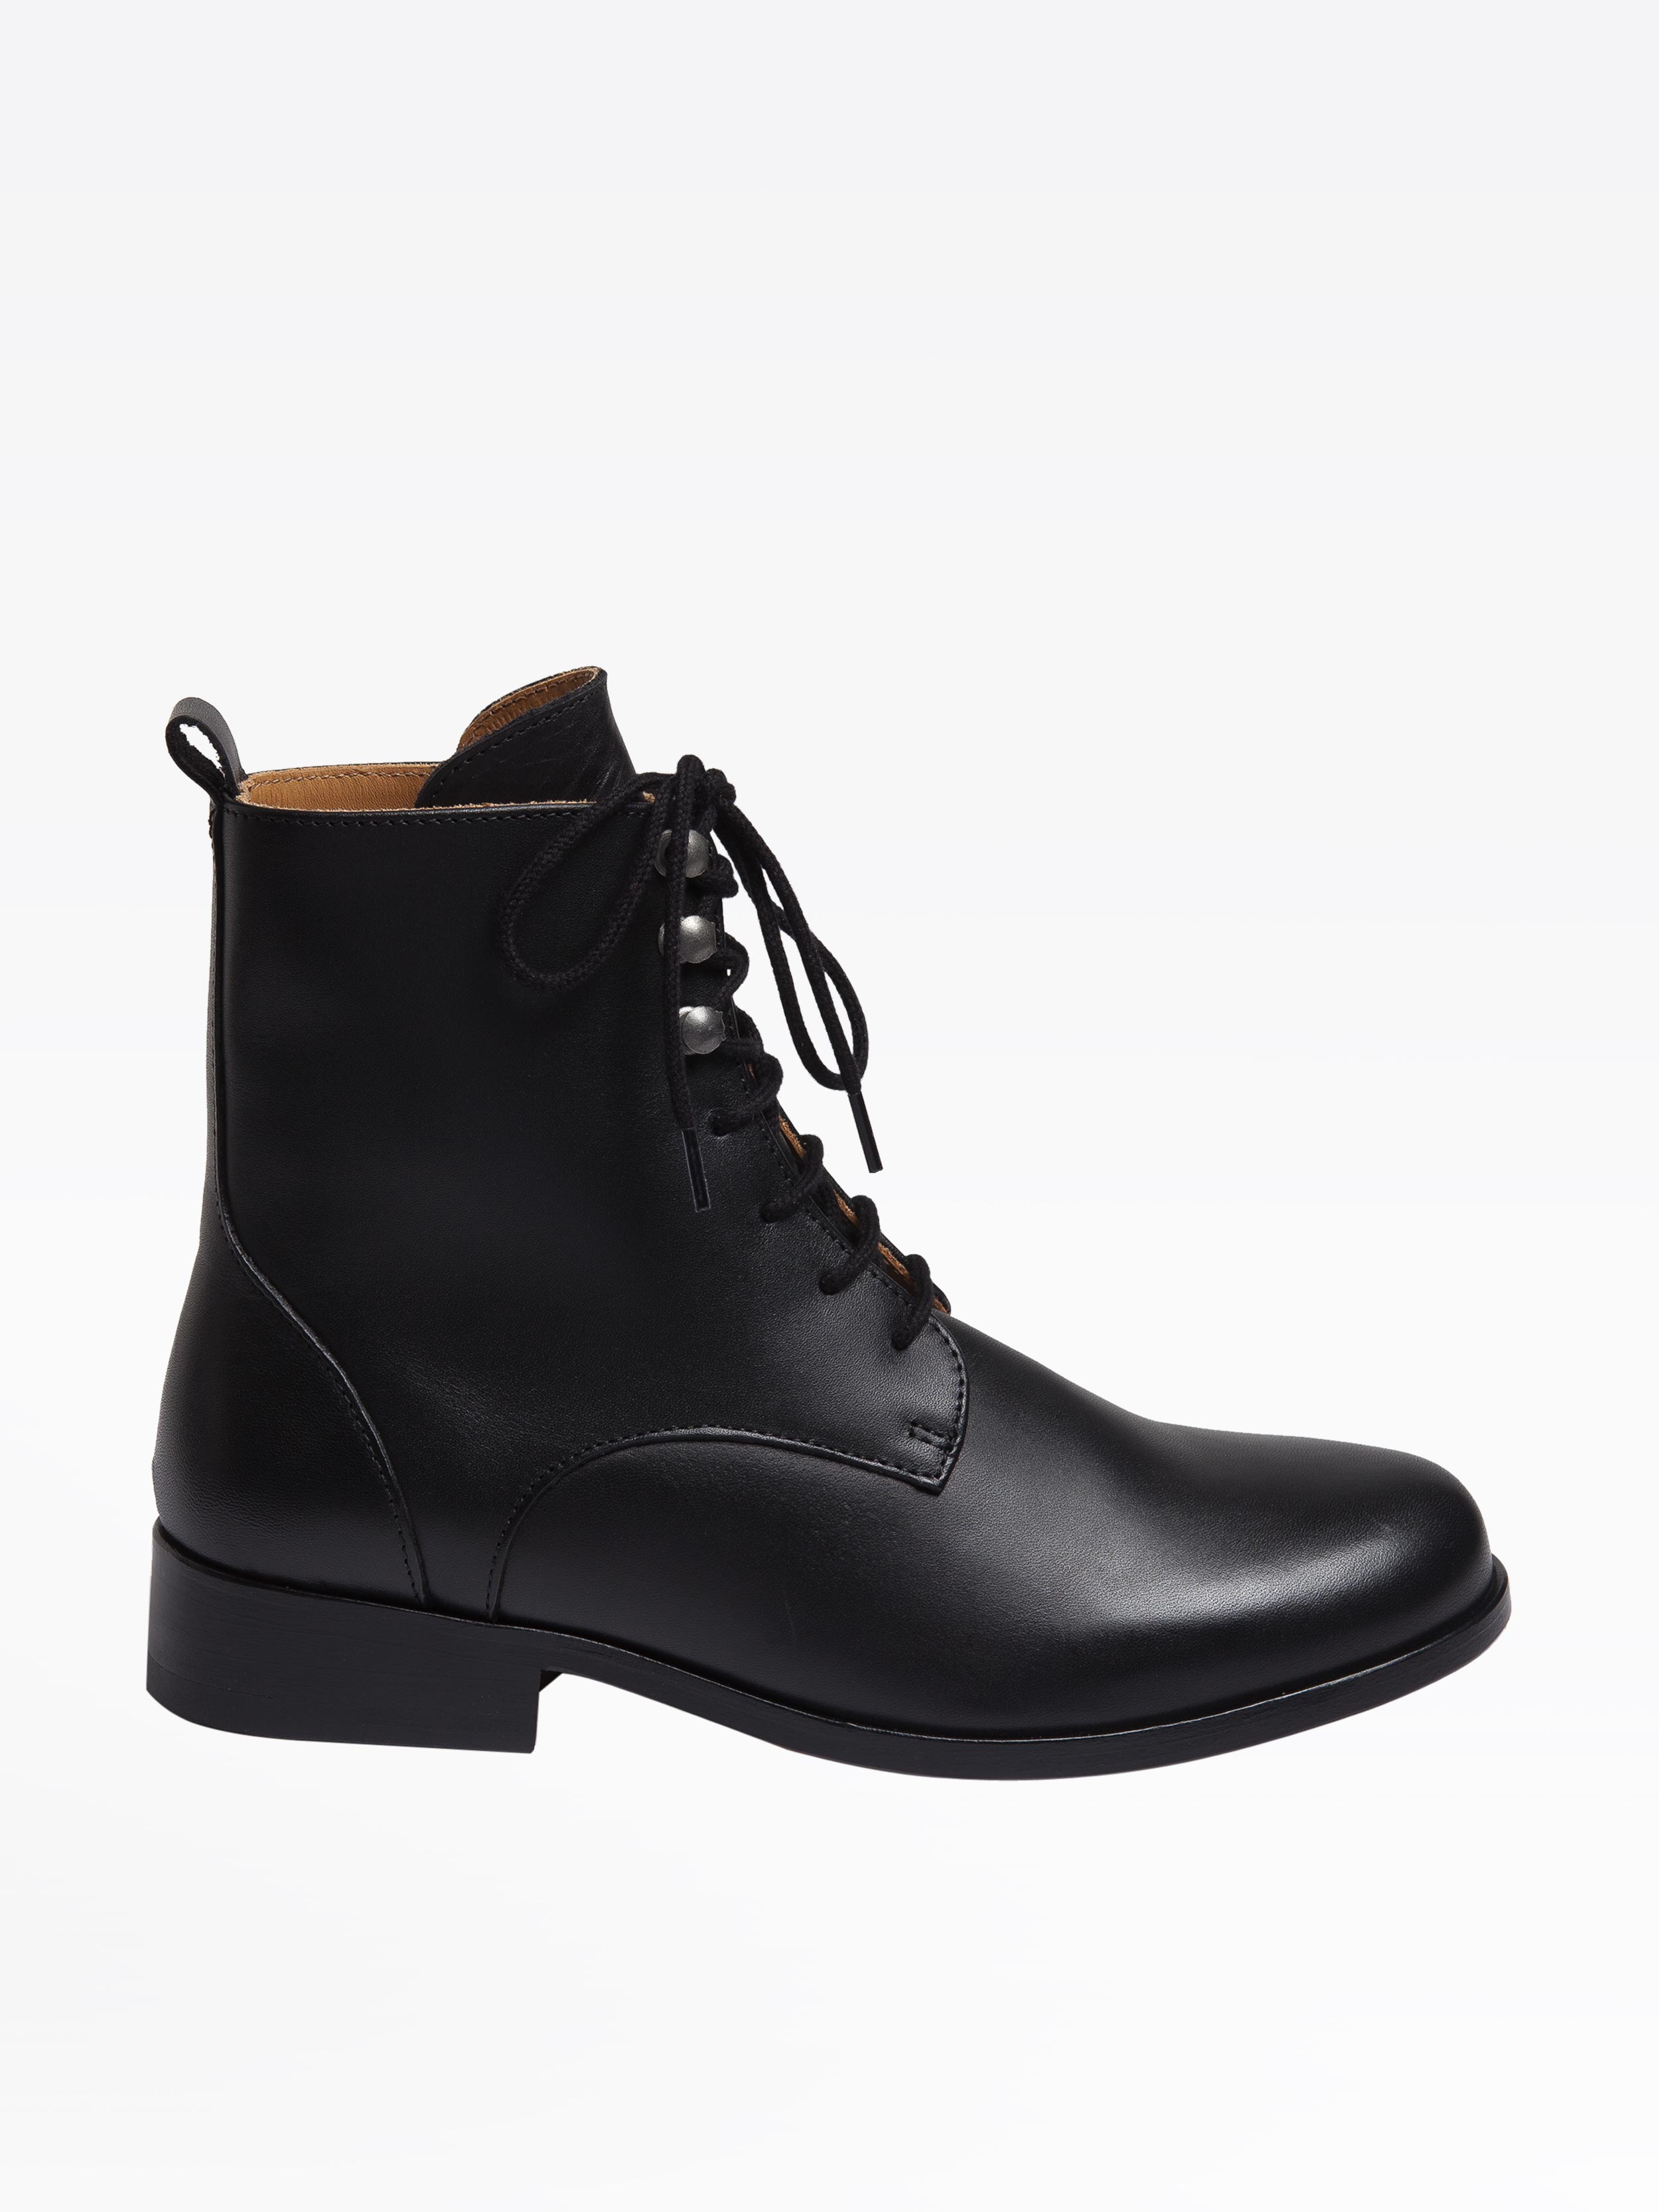 black leather ankle boots